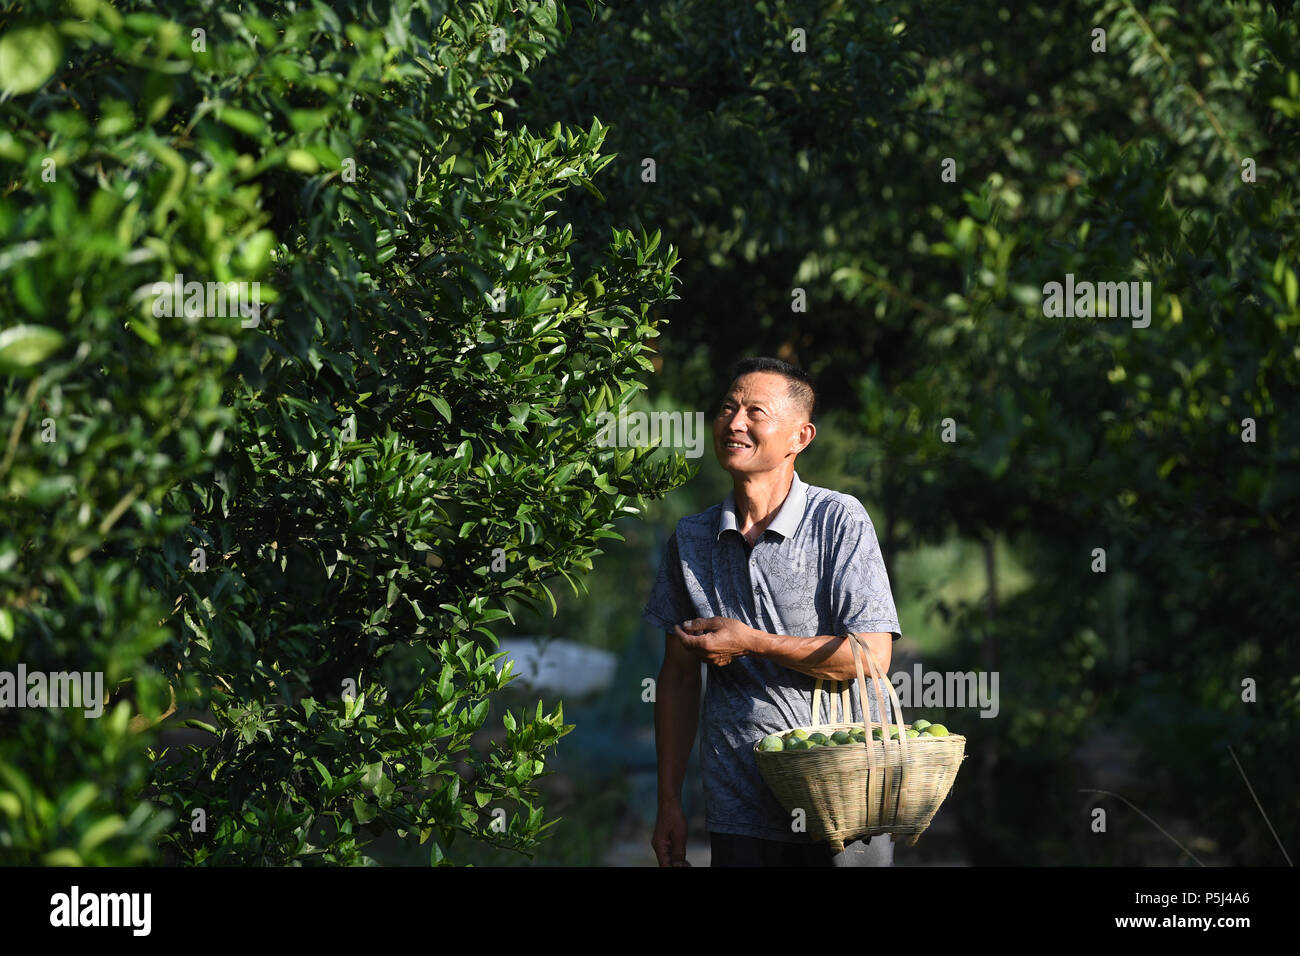 (180627) -- WUSHAN, June 27, 2018 (Xinhua) -- Wang Enhai checks the condition of green plum trees in his orchard in Quanfa Village of Wushan County, southwest China's Chongqing, June 26, 2018. Wang Enhai, 63, used to live in poverty. In 2012, he learnt to plant green plum as the local government began to promote green plum plantation and provide free seedlings, organic fertilizer and technical guidance for villagers. His hard working has been paid back as the living conditions in Wang's family gets better. He has shared his experience with other farmers and helped them with plum cultivation. Stock Photo